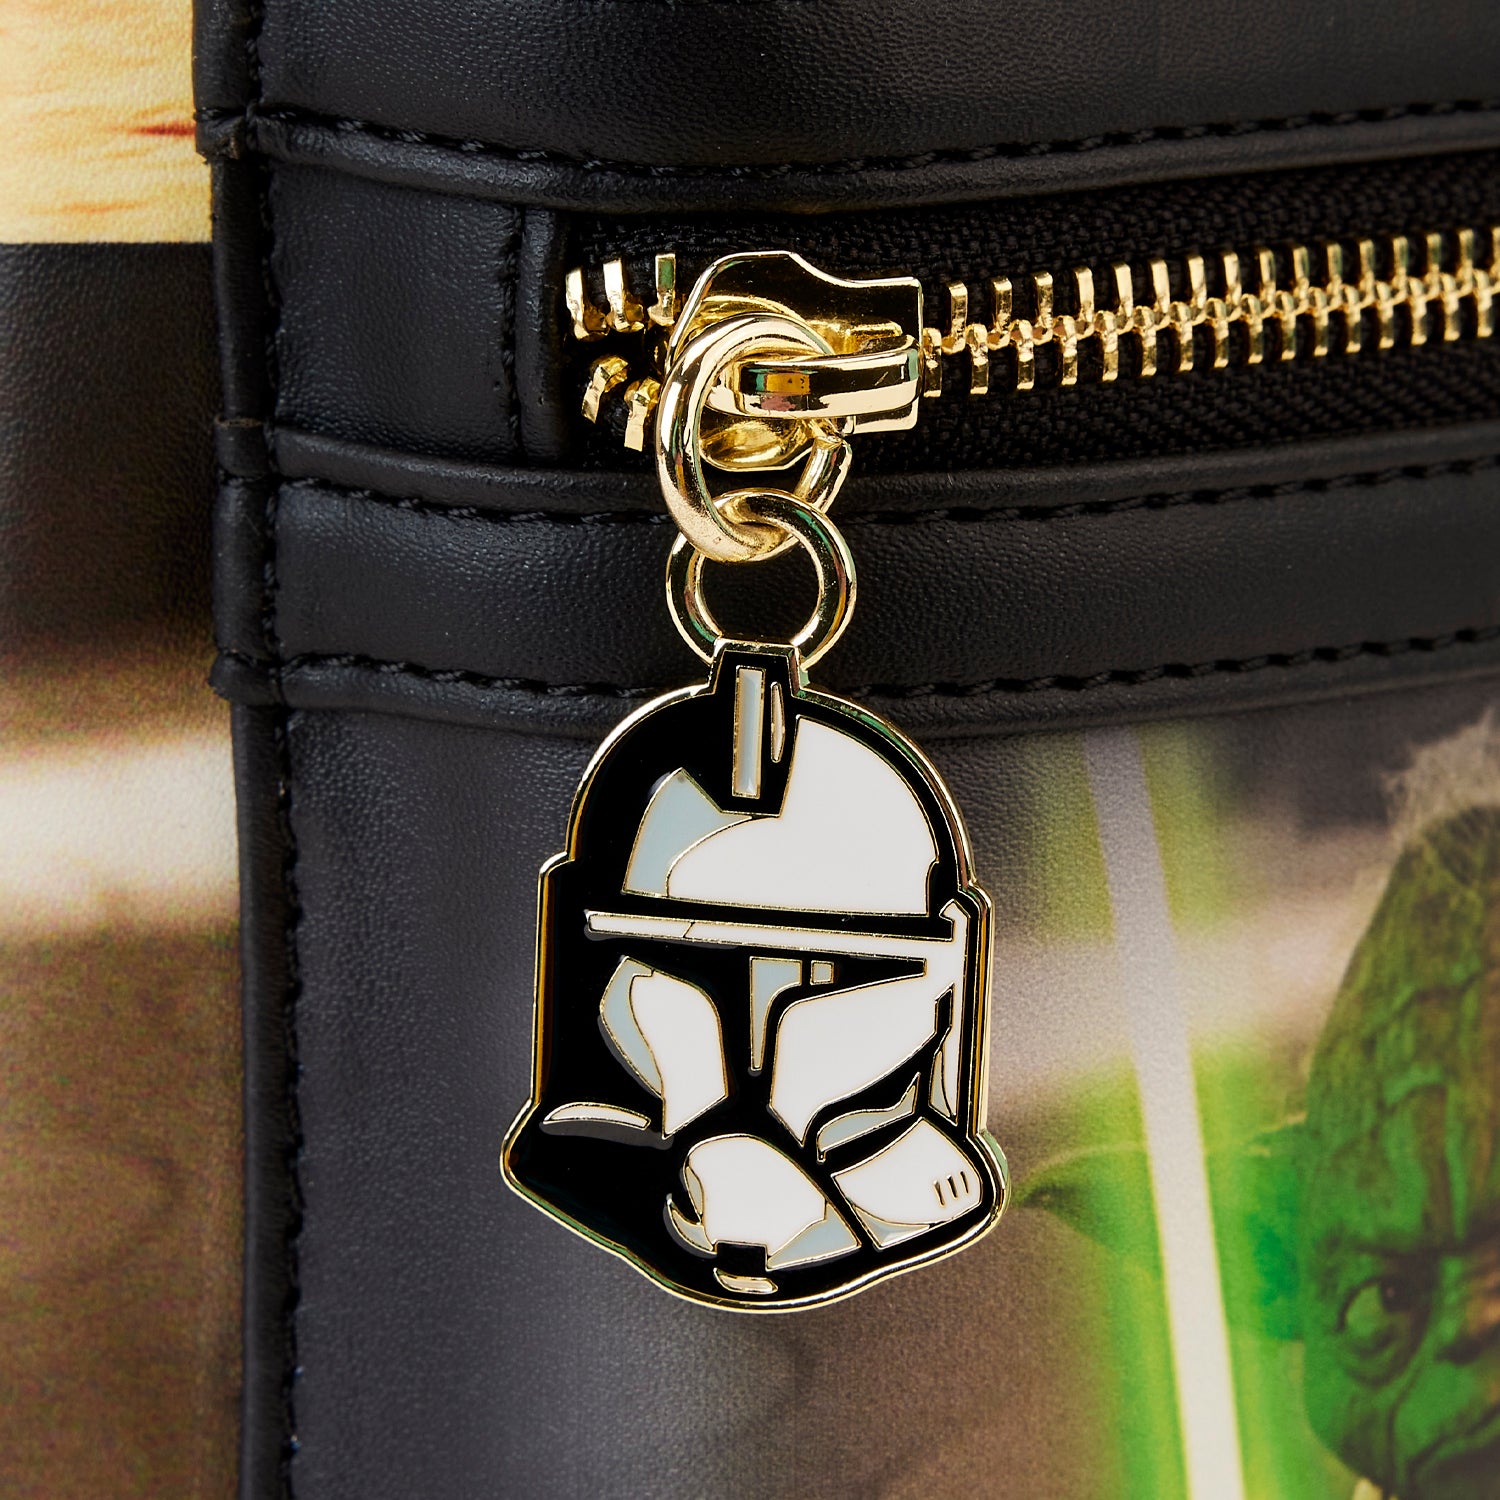 Loungefly x Star Wars Attack of the Clones Scenes Mini Backpack